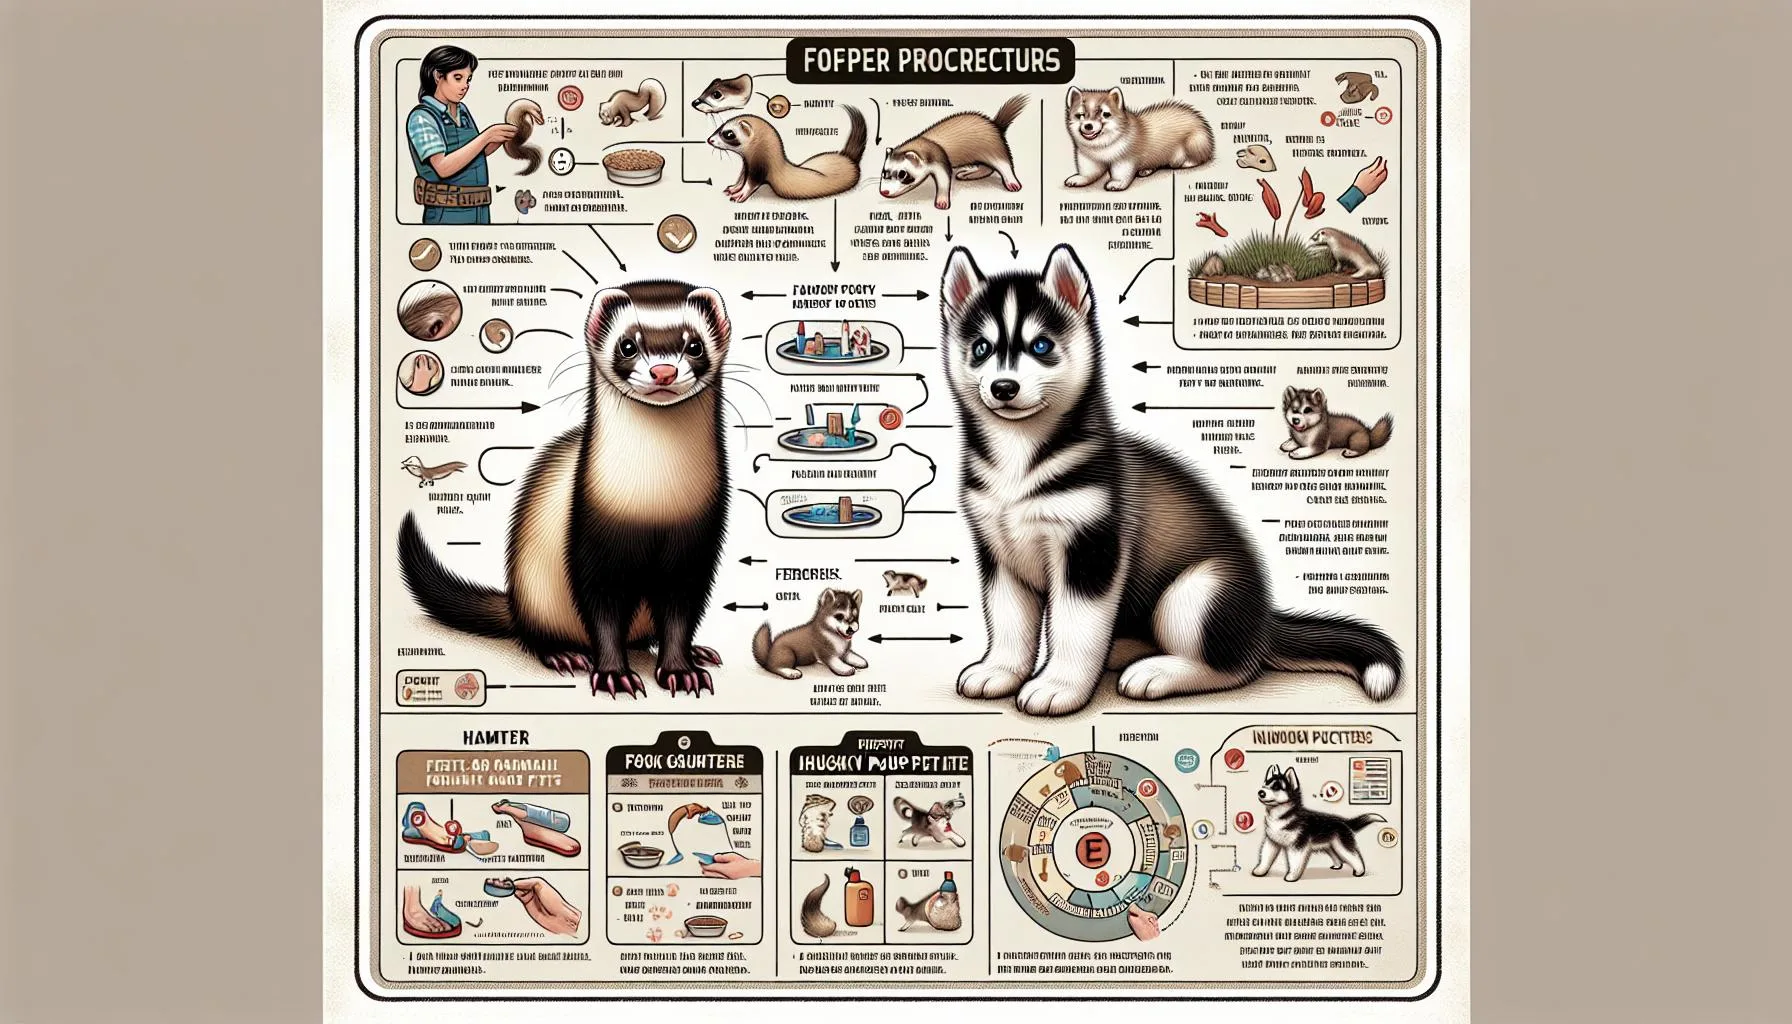 How to take care of husky puppy: Learn & Love the process!